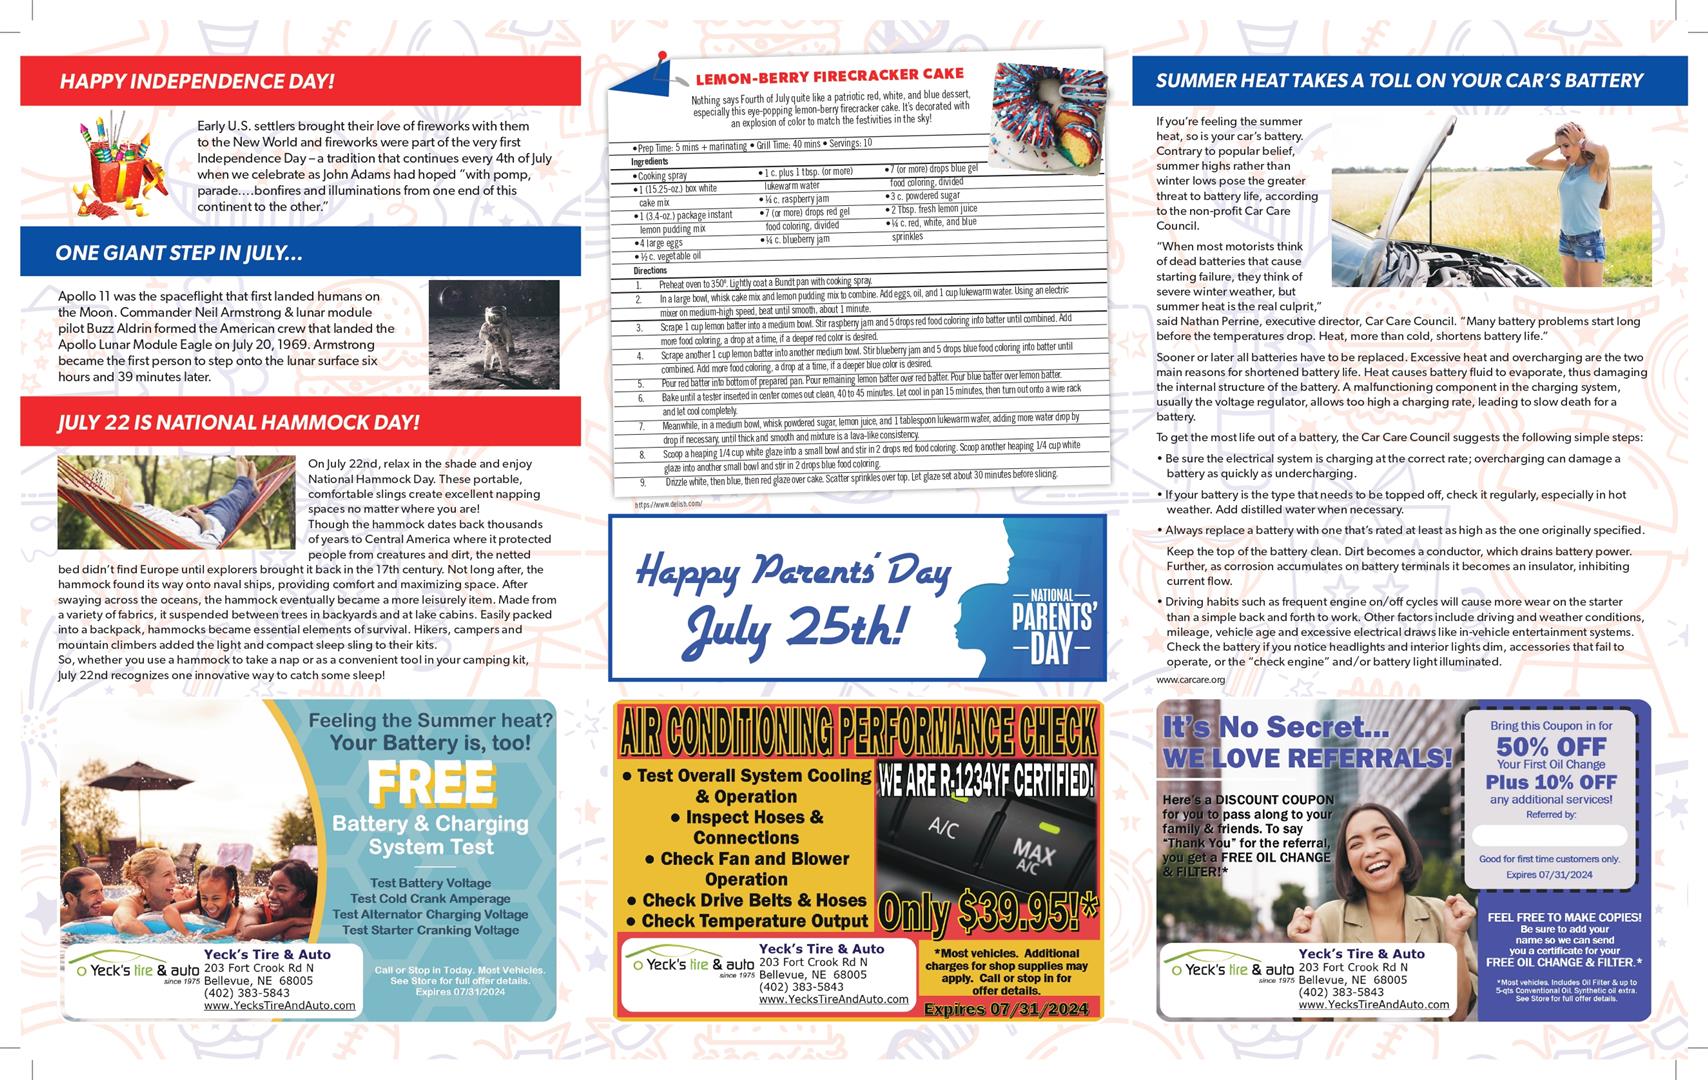 Monthly Newsletter Page 2 | Yeck's Tire & Auto